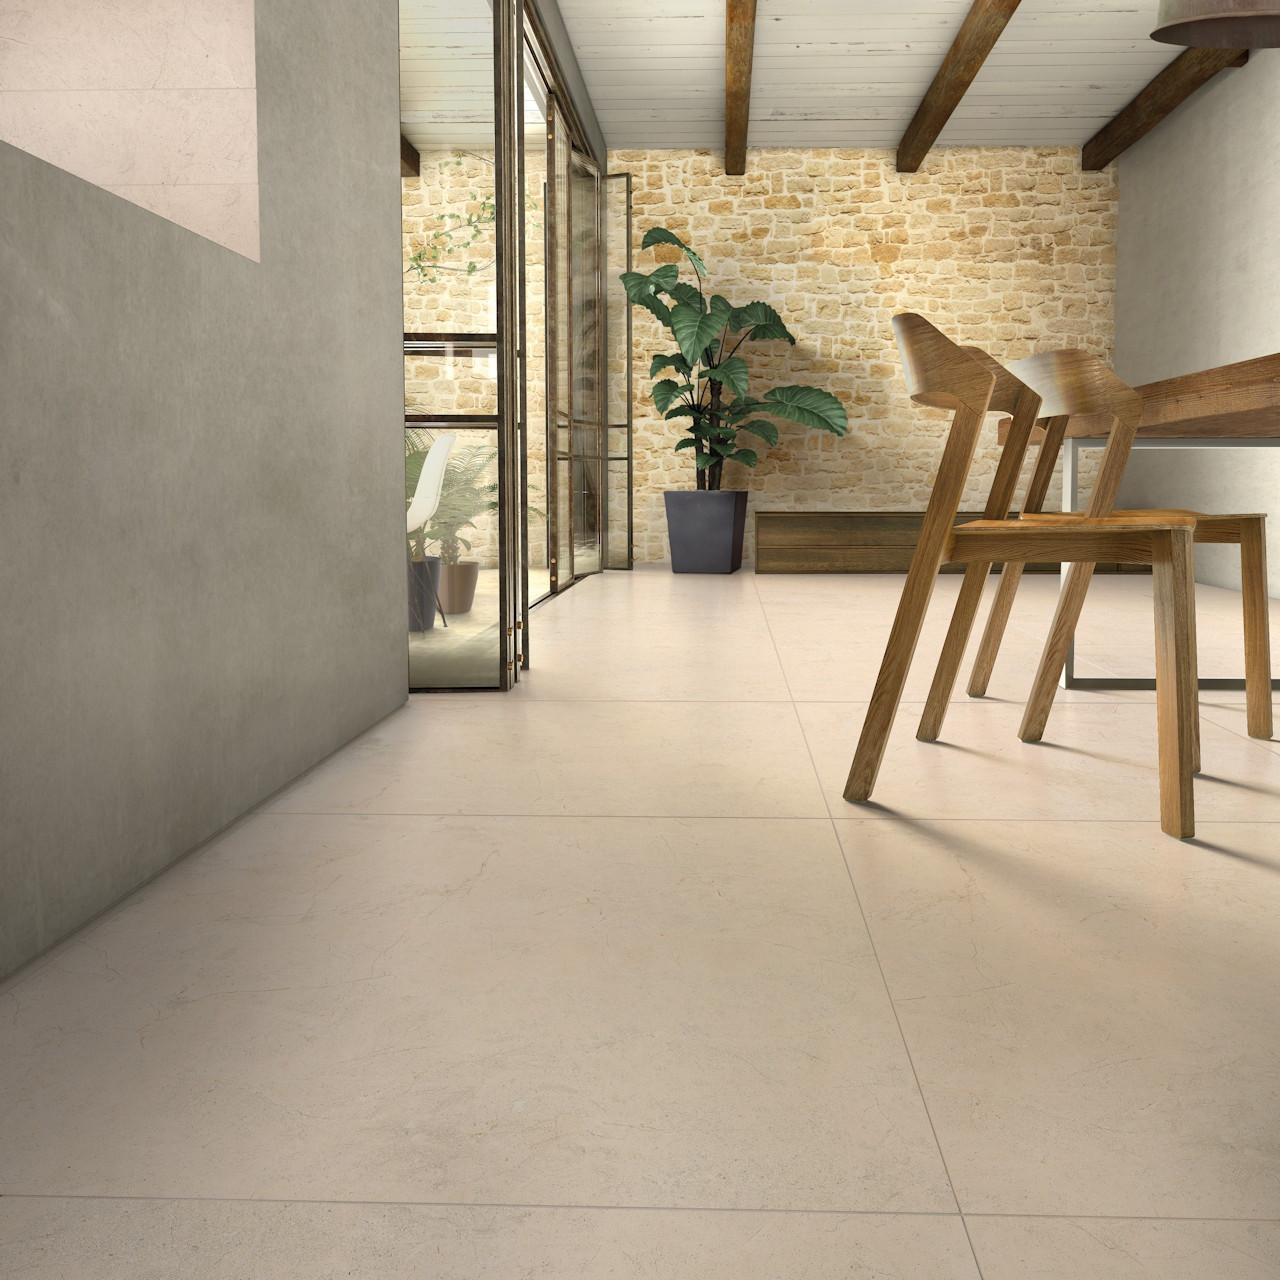 Luni Pietre di Paragone R10 Series Porcelain Tile Floor and Wall by Casalgrande Padana
